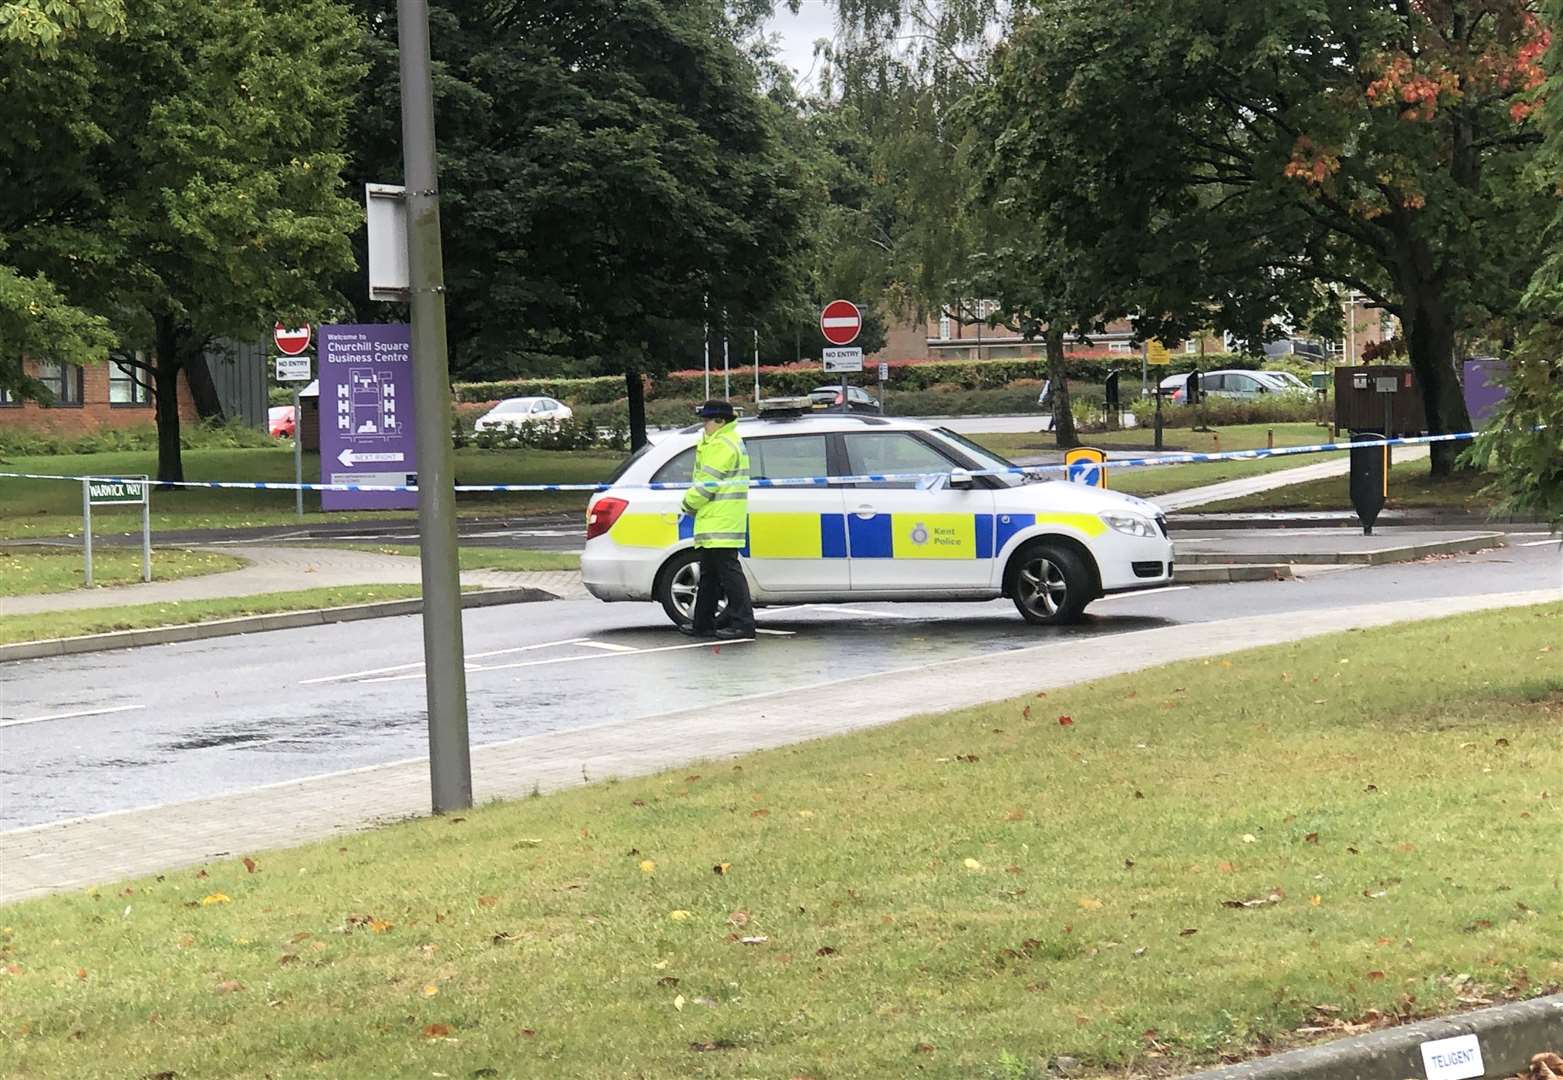 Police have put a cordon in place in Kings Hill